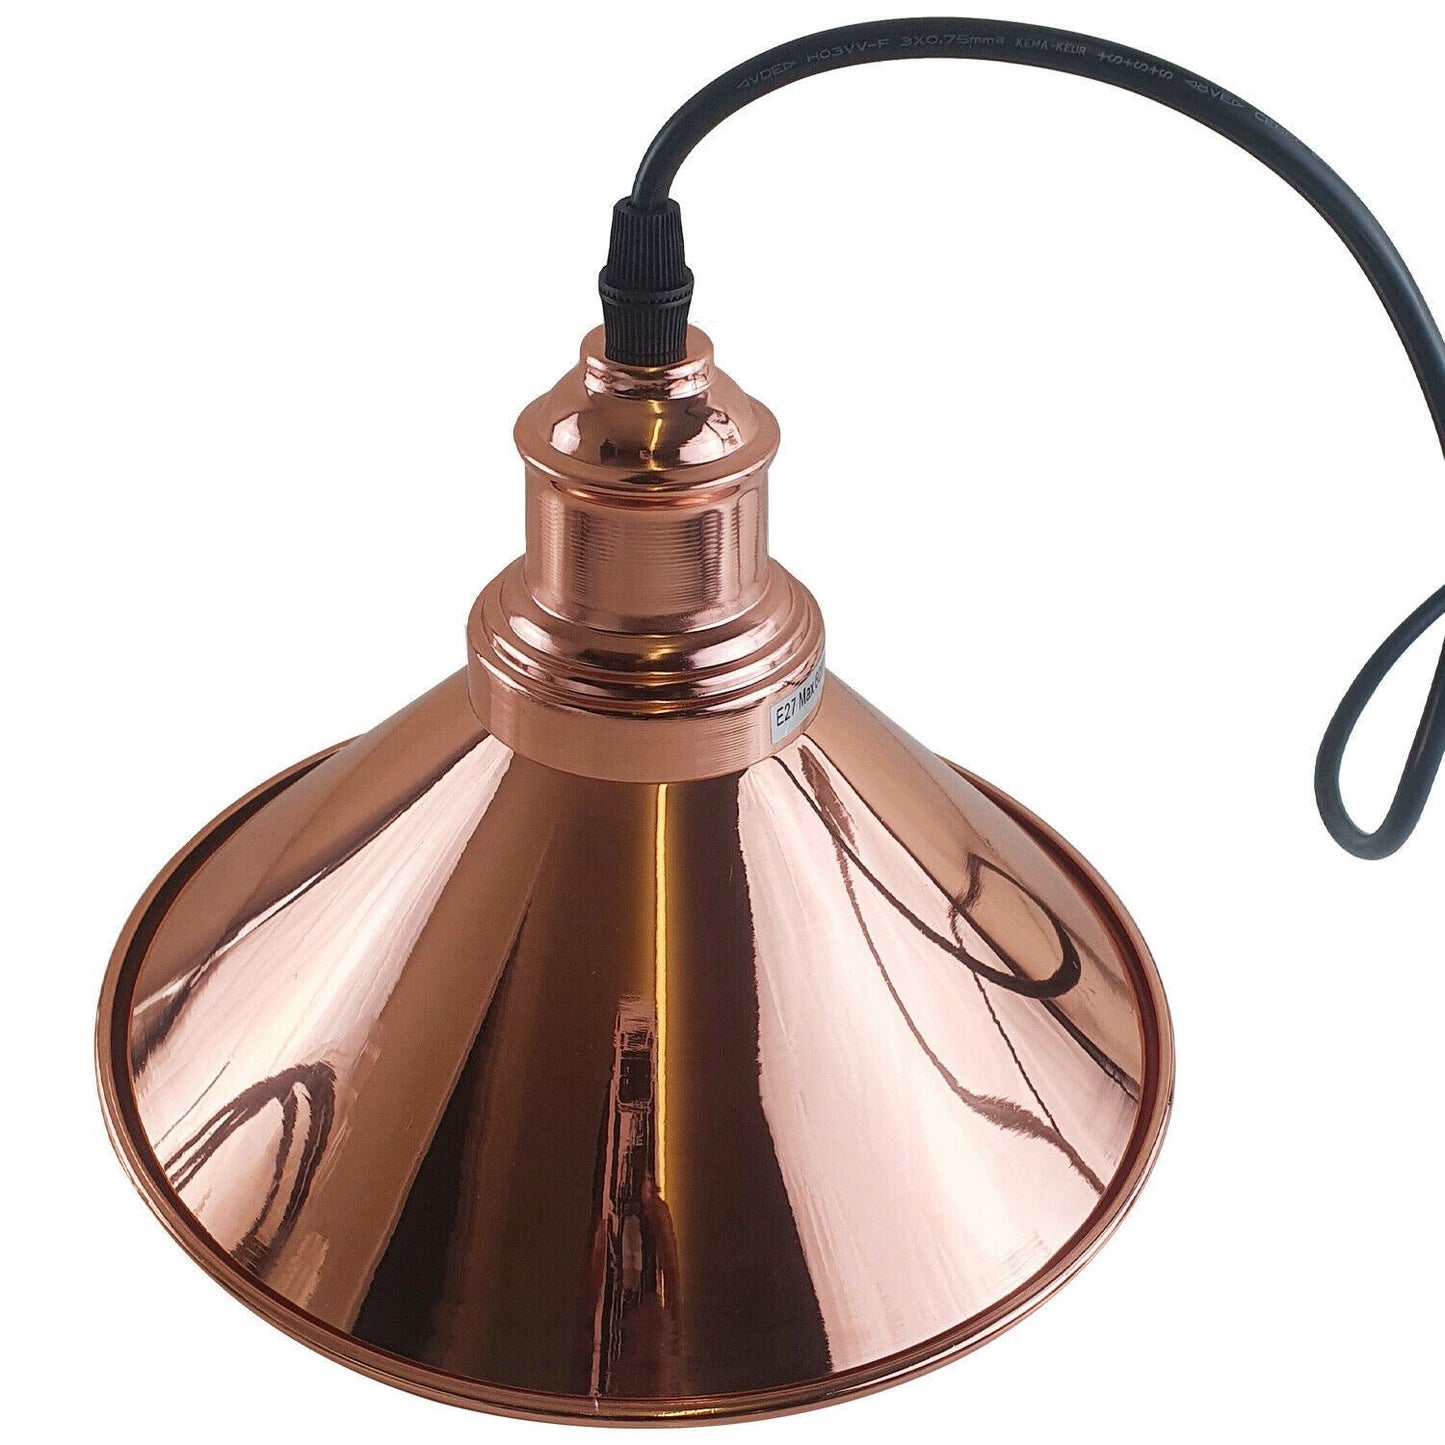 Vintage 3 way Easy fit Cone Shade Ceiling Hanging Pendant Light~2087